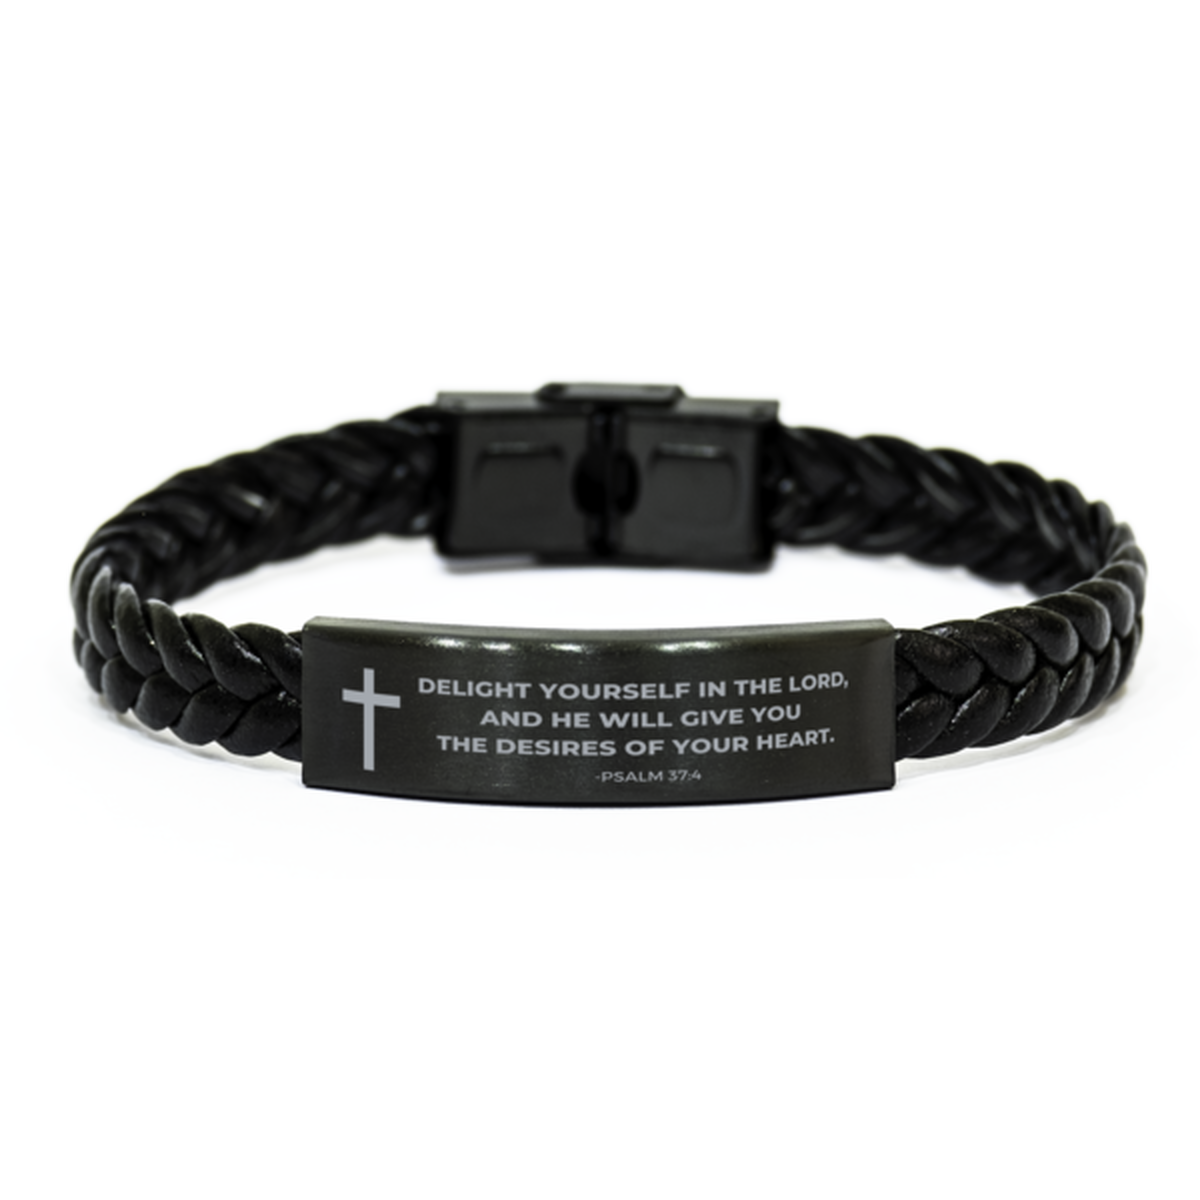 Baptism Gifts For Teenage Boys Girls, Christian Bible Verse Braided Leather Bracelet, Delight yourself in the Lord, Catholic Confirmation Gifts for Son, Godson, Grandson, Nephew